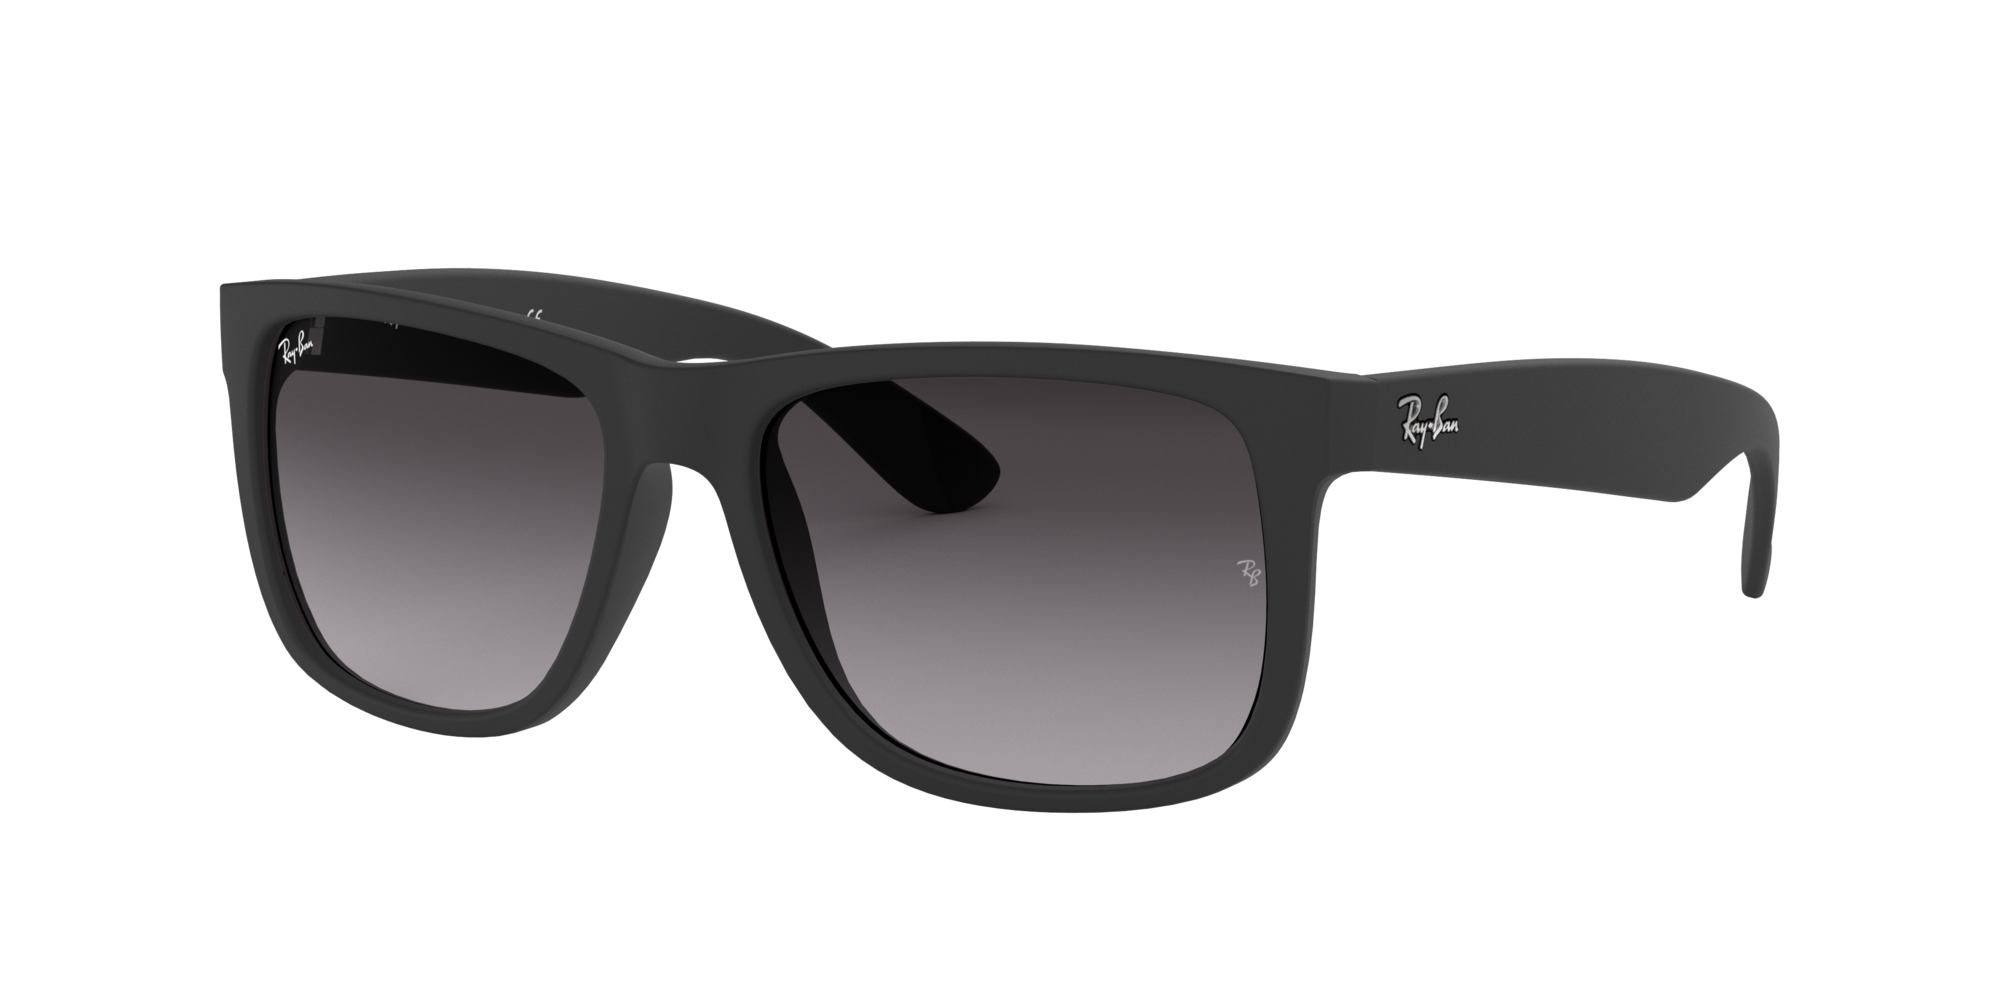 Ray-Ban 0RB4165F in Black Sunglasses | OPSM